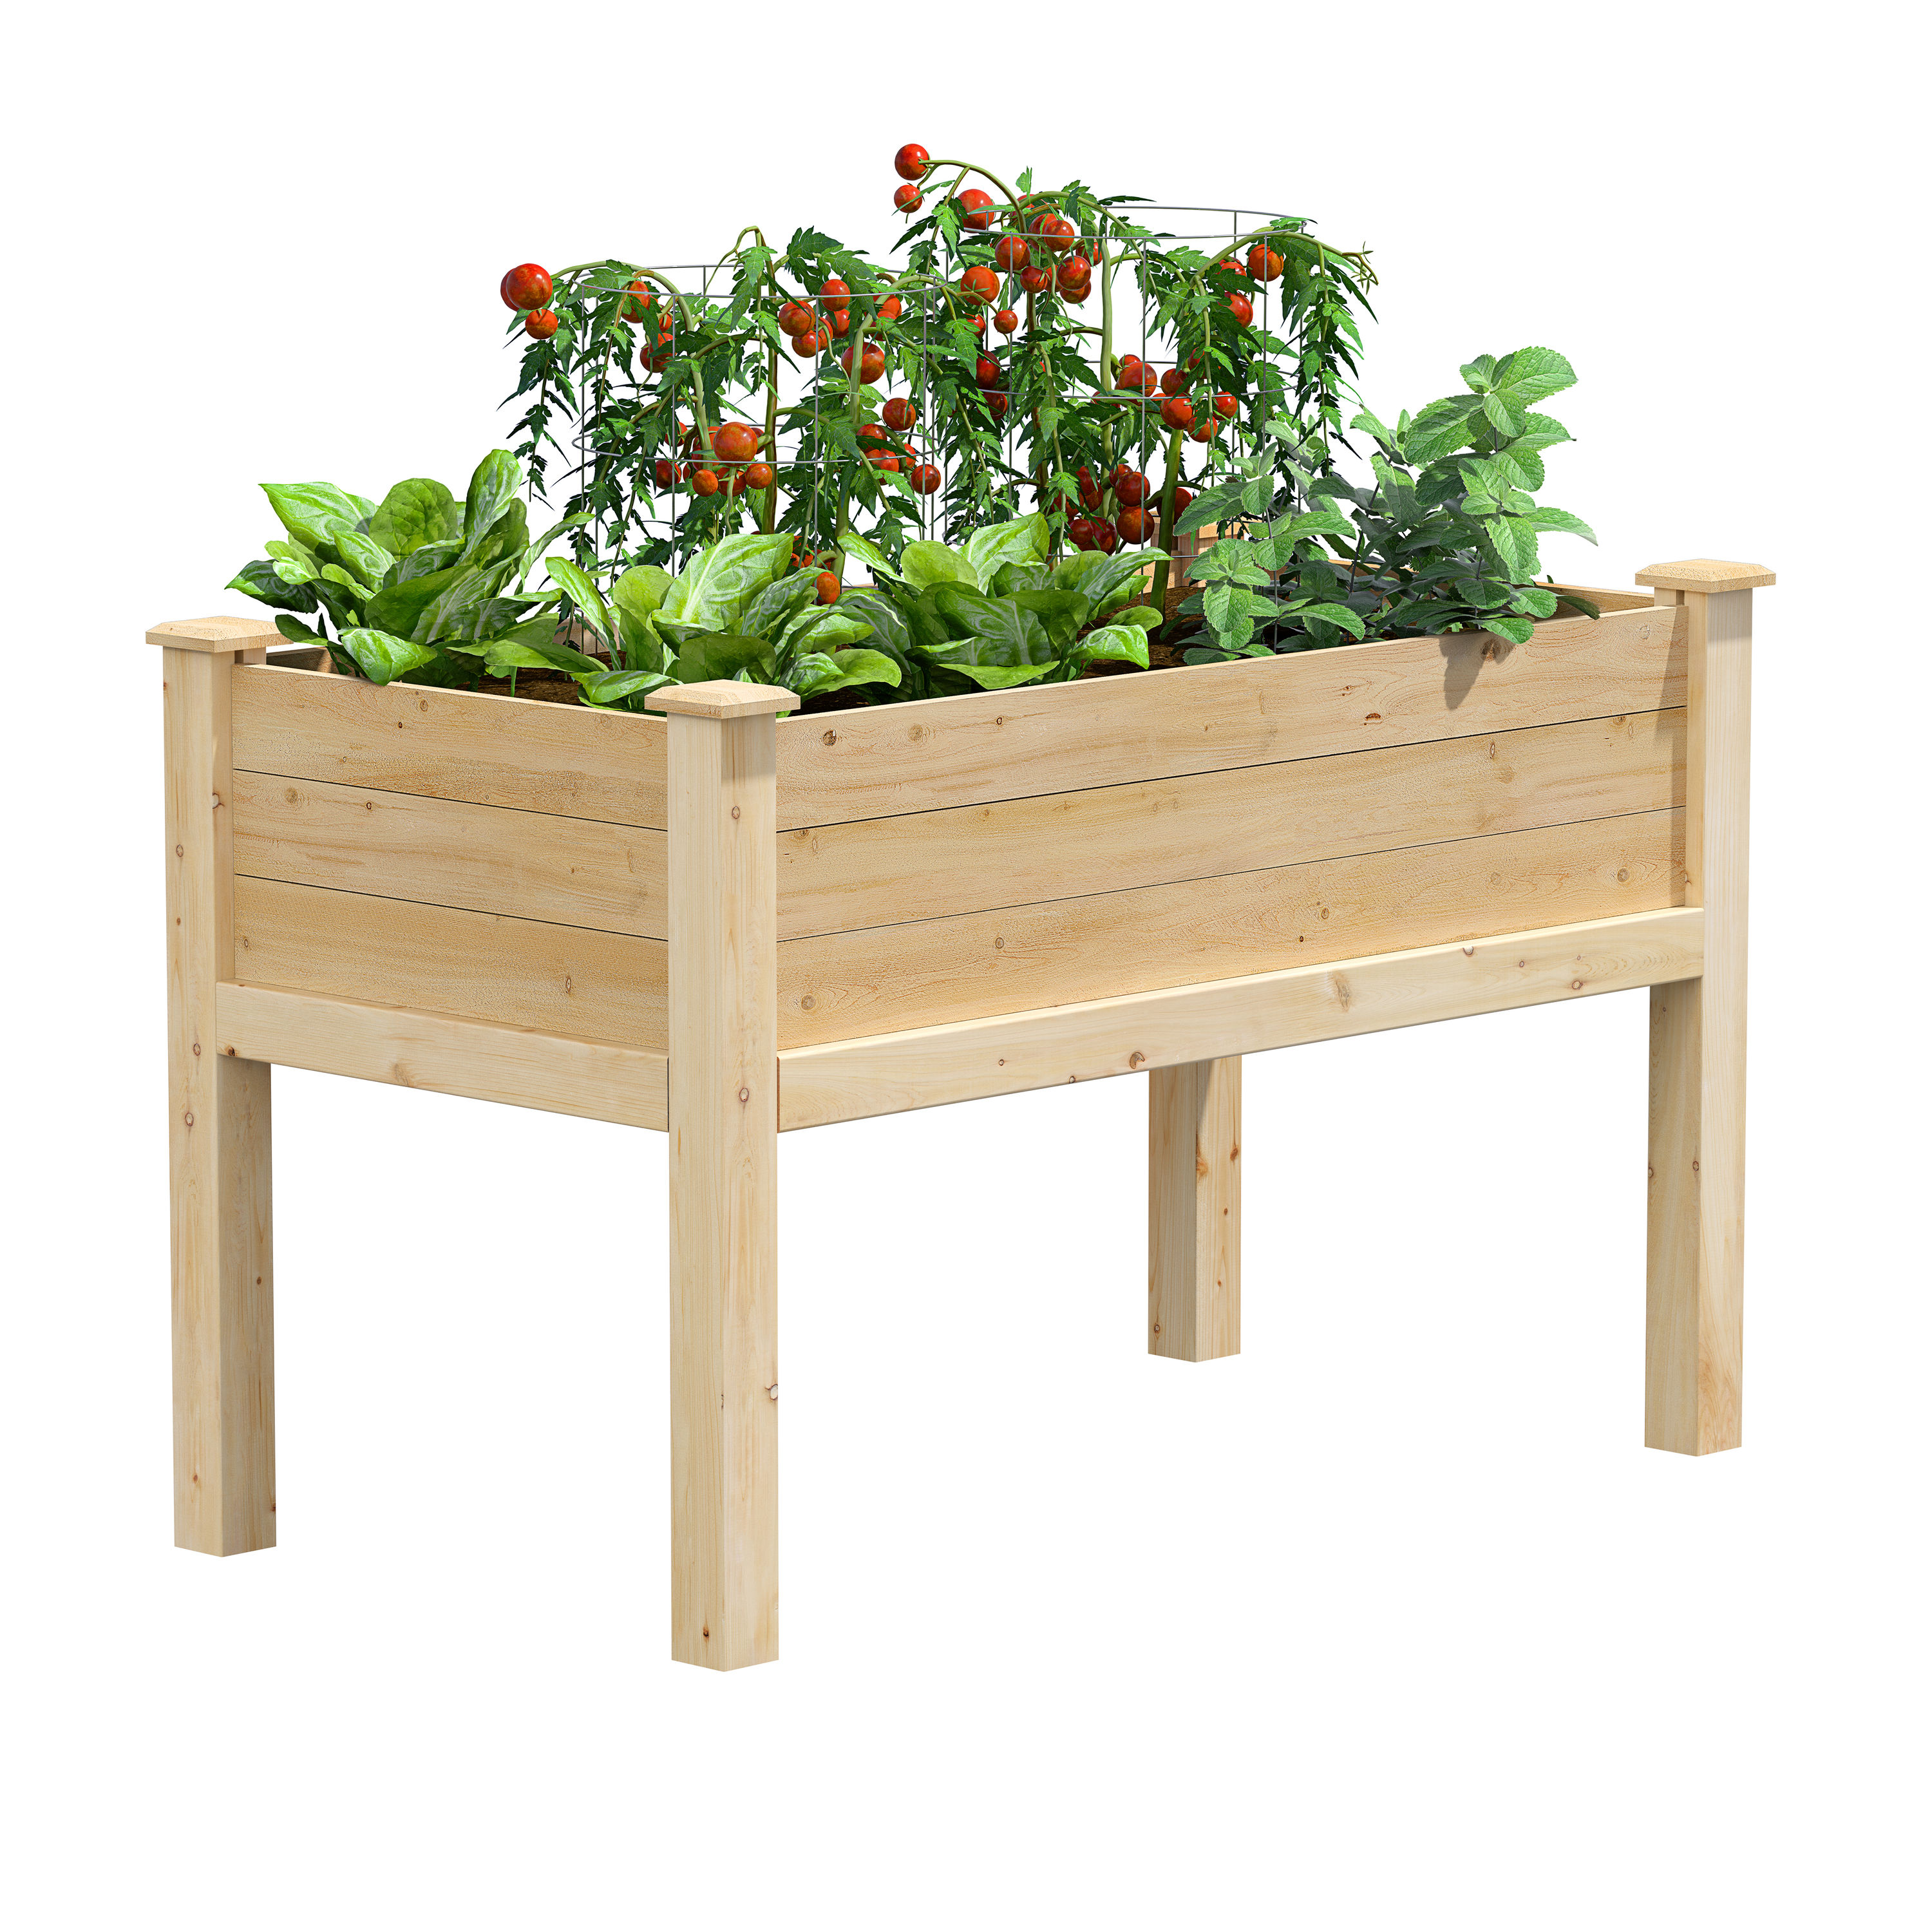 Raised Garden Bed for Vegetables Elevated Planter Box with Legs Outdoor Herb Kit 